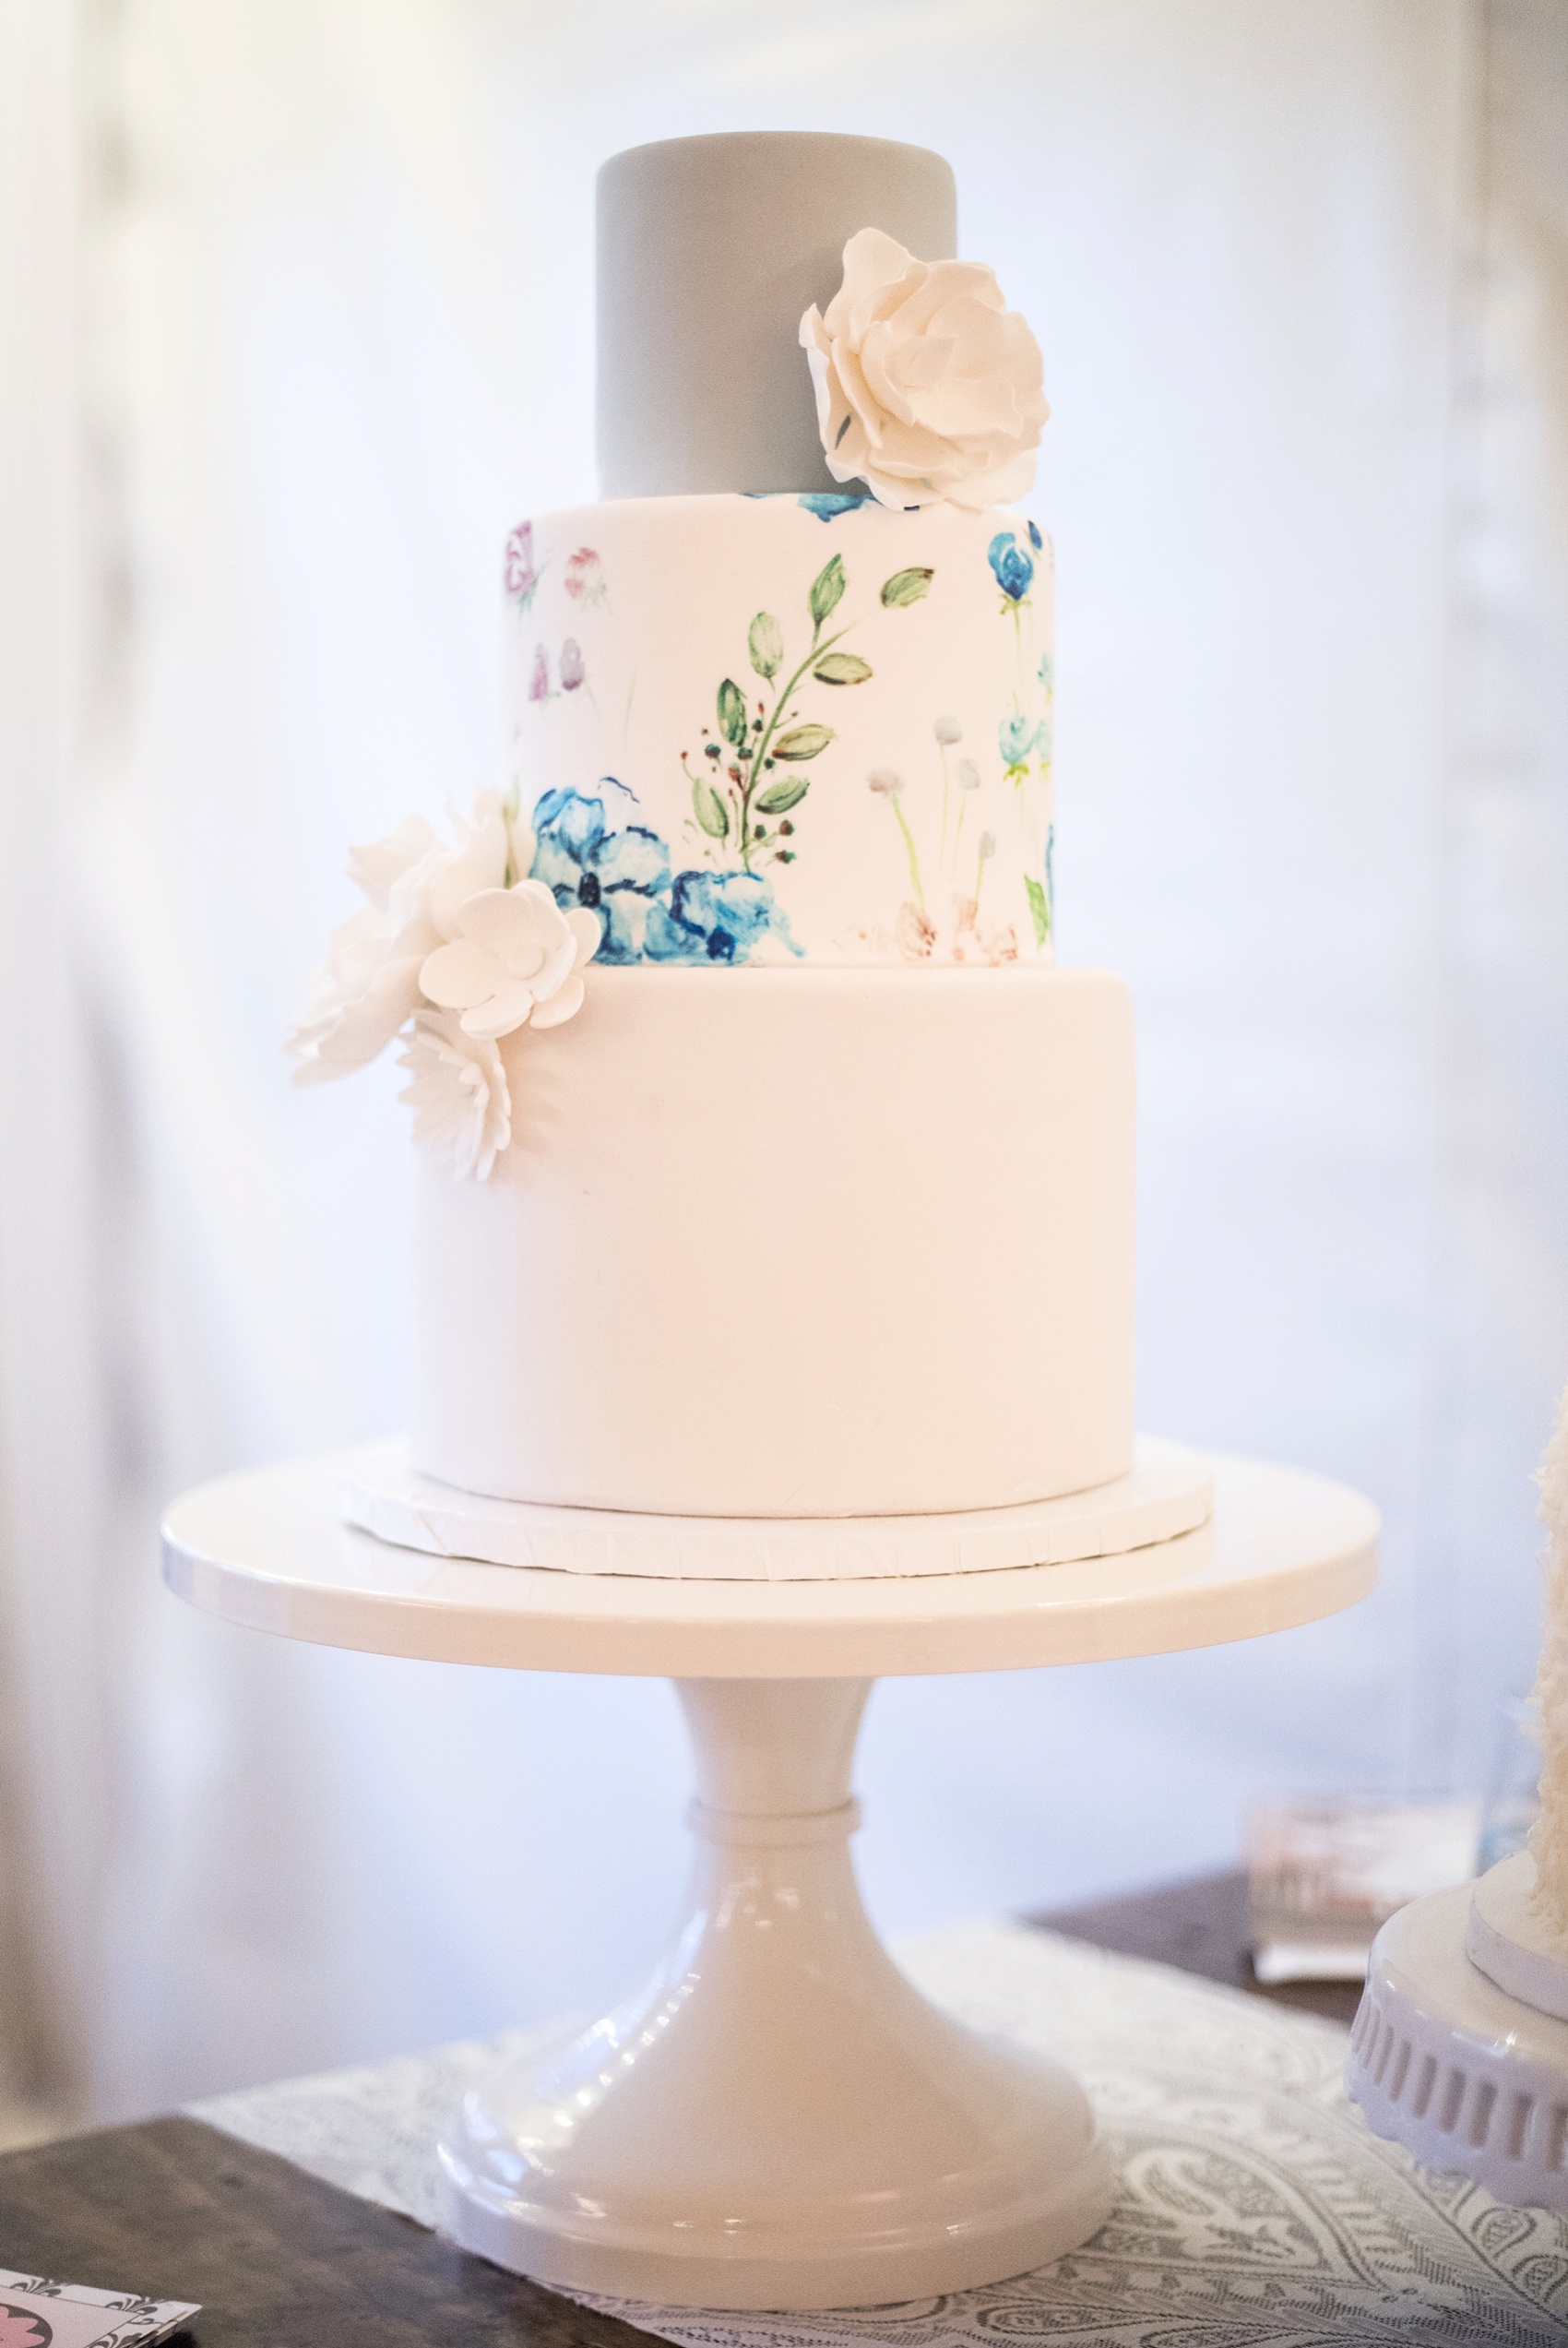 Raleigh North Carolina wedding photographer Mikkel Paige visits Merrimon-Wynne bridal event, featuring hand painted cake design by The Cupcake Shoppe. 